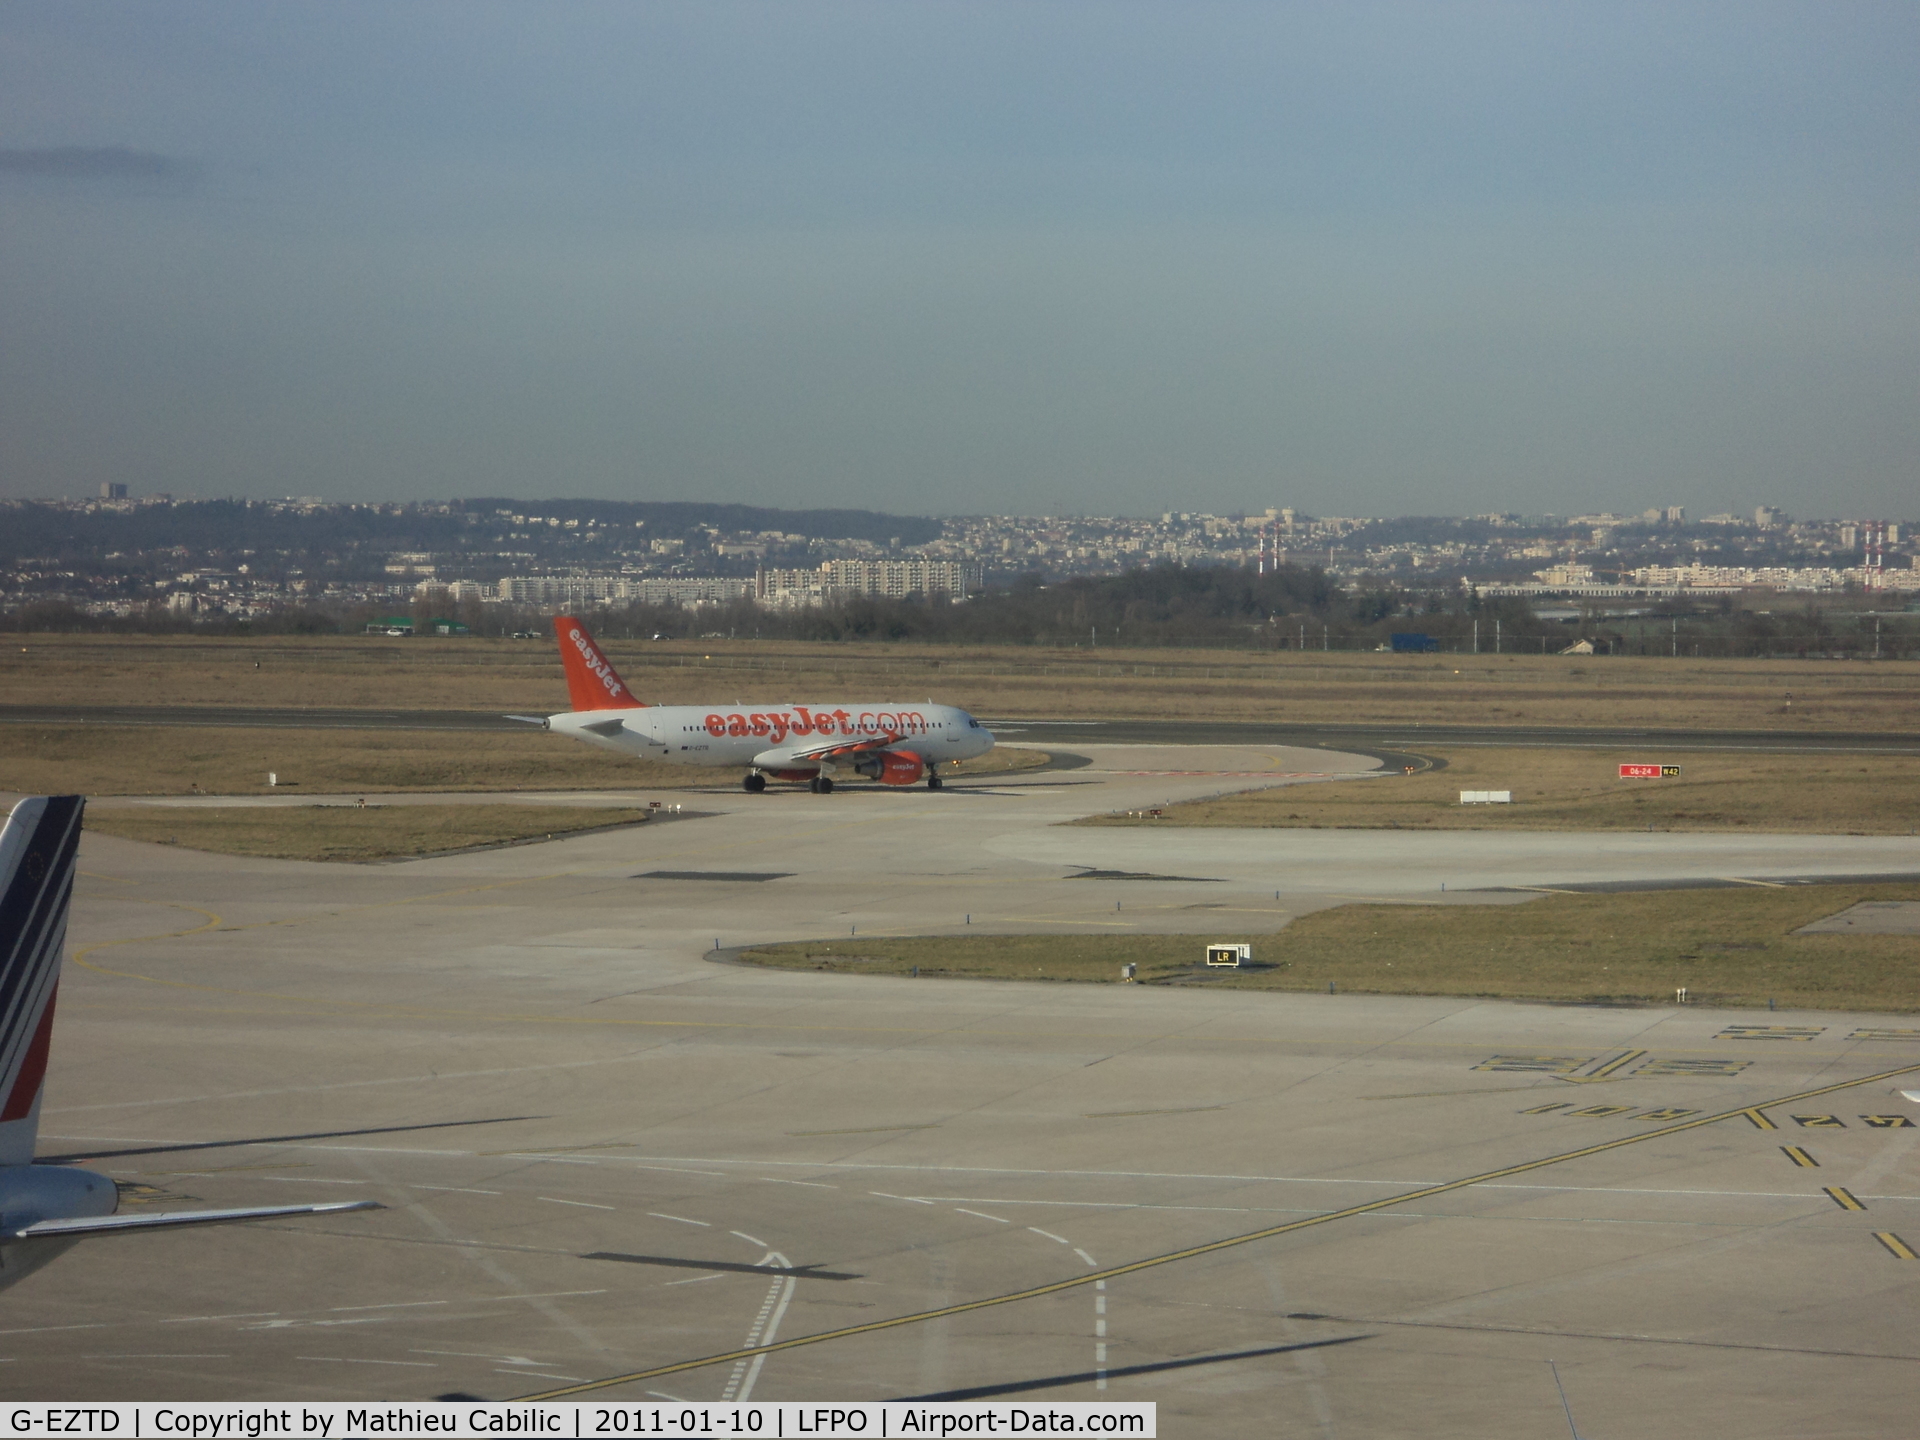 G-EZTD, 2009 Airbus A320-214 C/N 3909, Airbus A320-214 EasyJet on the taxiway for the runway 24